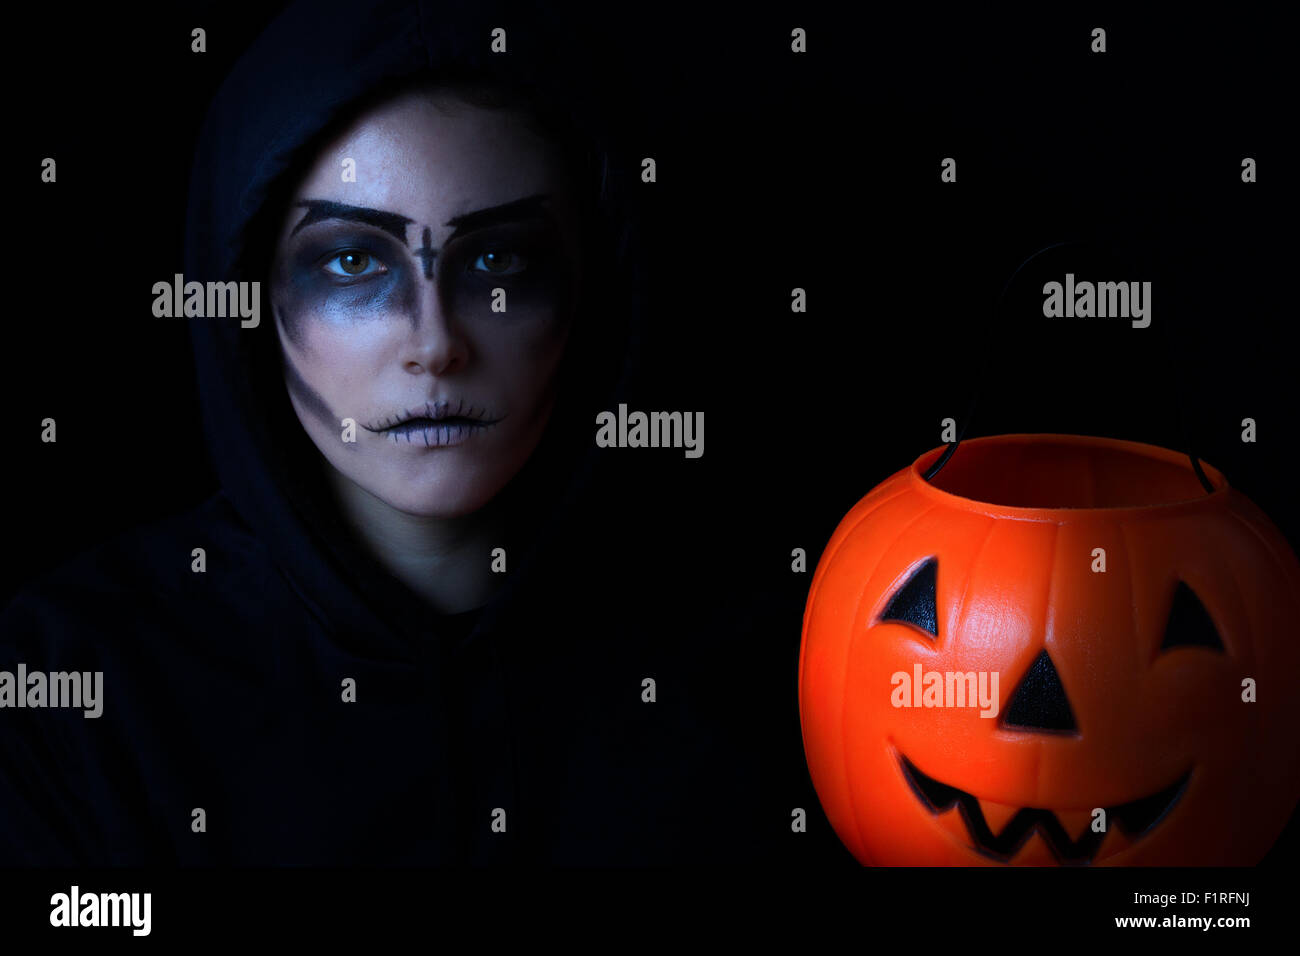 Teen girl in scary face paint holding large pumpkin container on black background. Trick or treat concept for Halloween Stock Photo